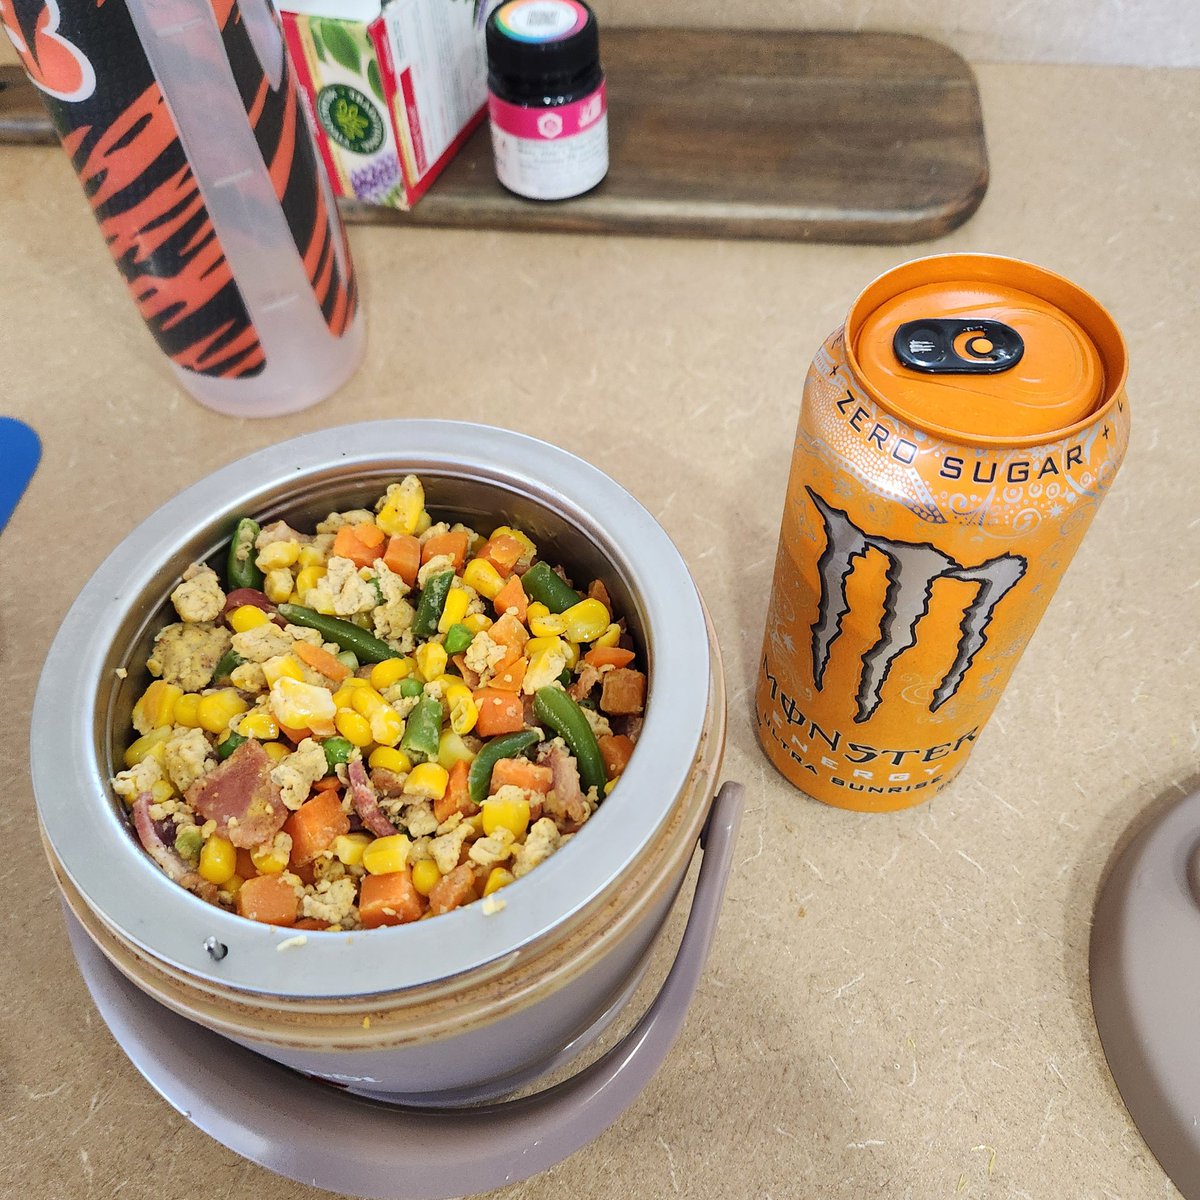 #Brunch #homemade #breakfastbowl
#mixedveggies #bacon

I put #TacoSeasoning, a slash of #beefbroth, splash of #heavywhippingcream and #Cinnamon in the eggs, it is really good. Oh and an #ultrasunrise #monsterenergy

Good lord I have become one of those annoying posters who put